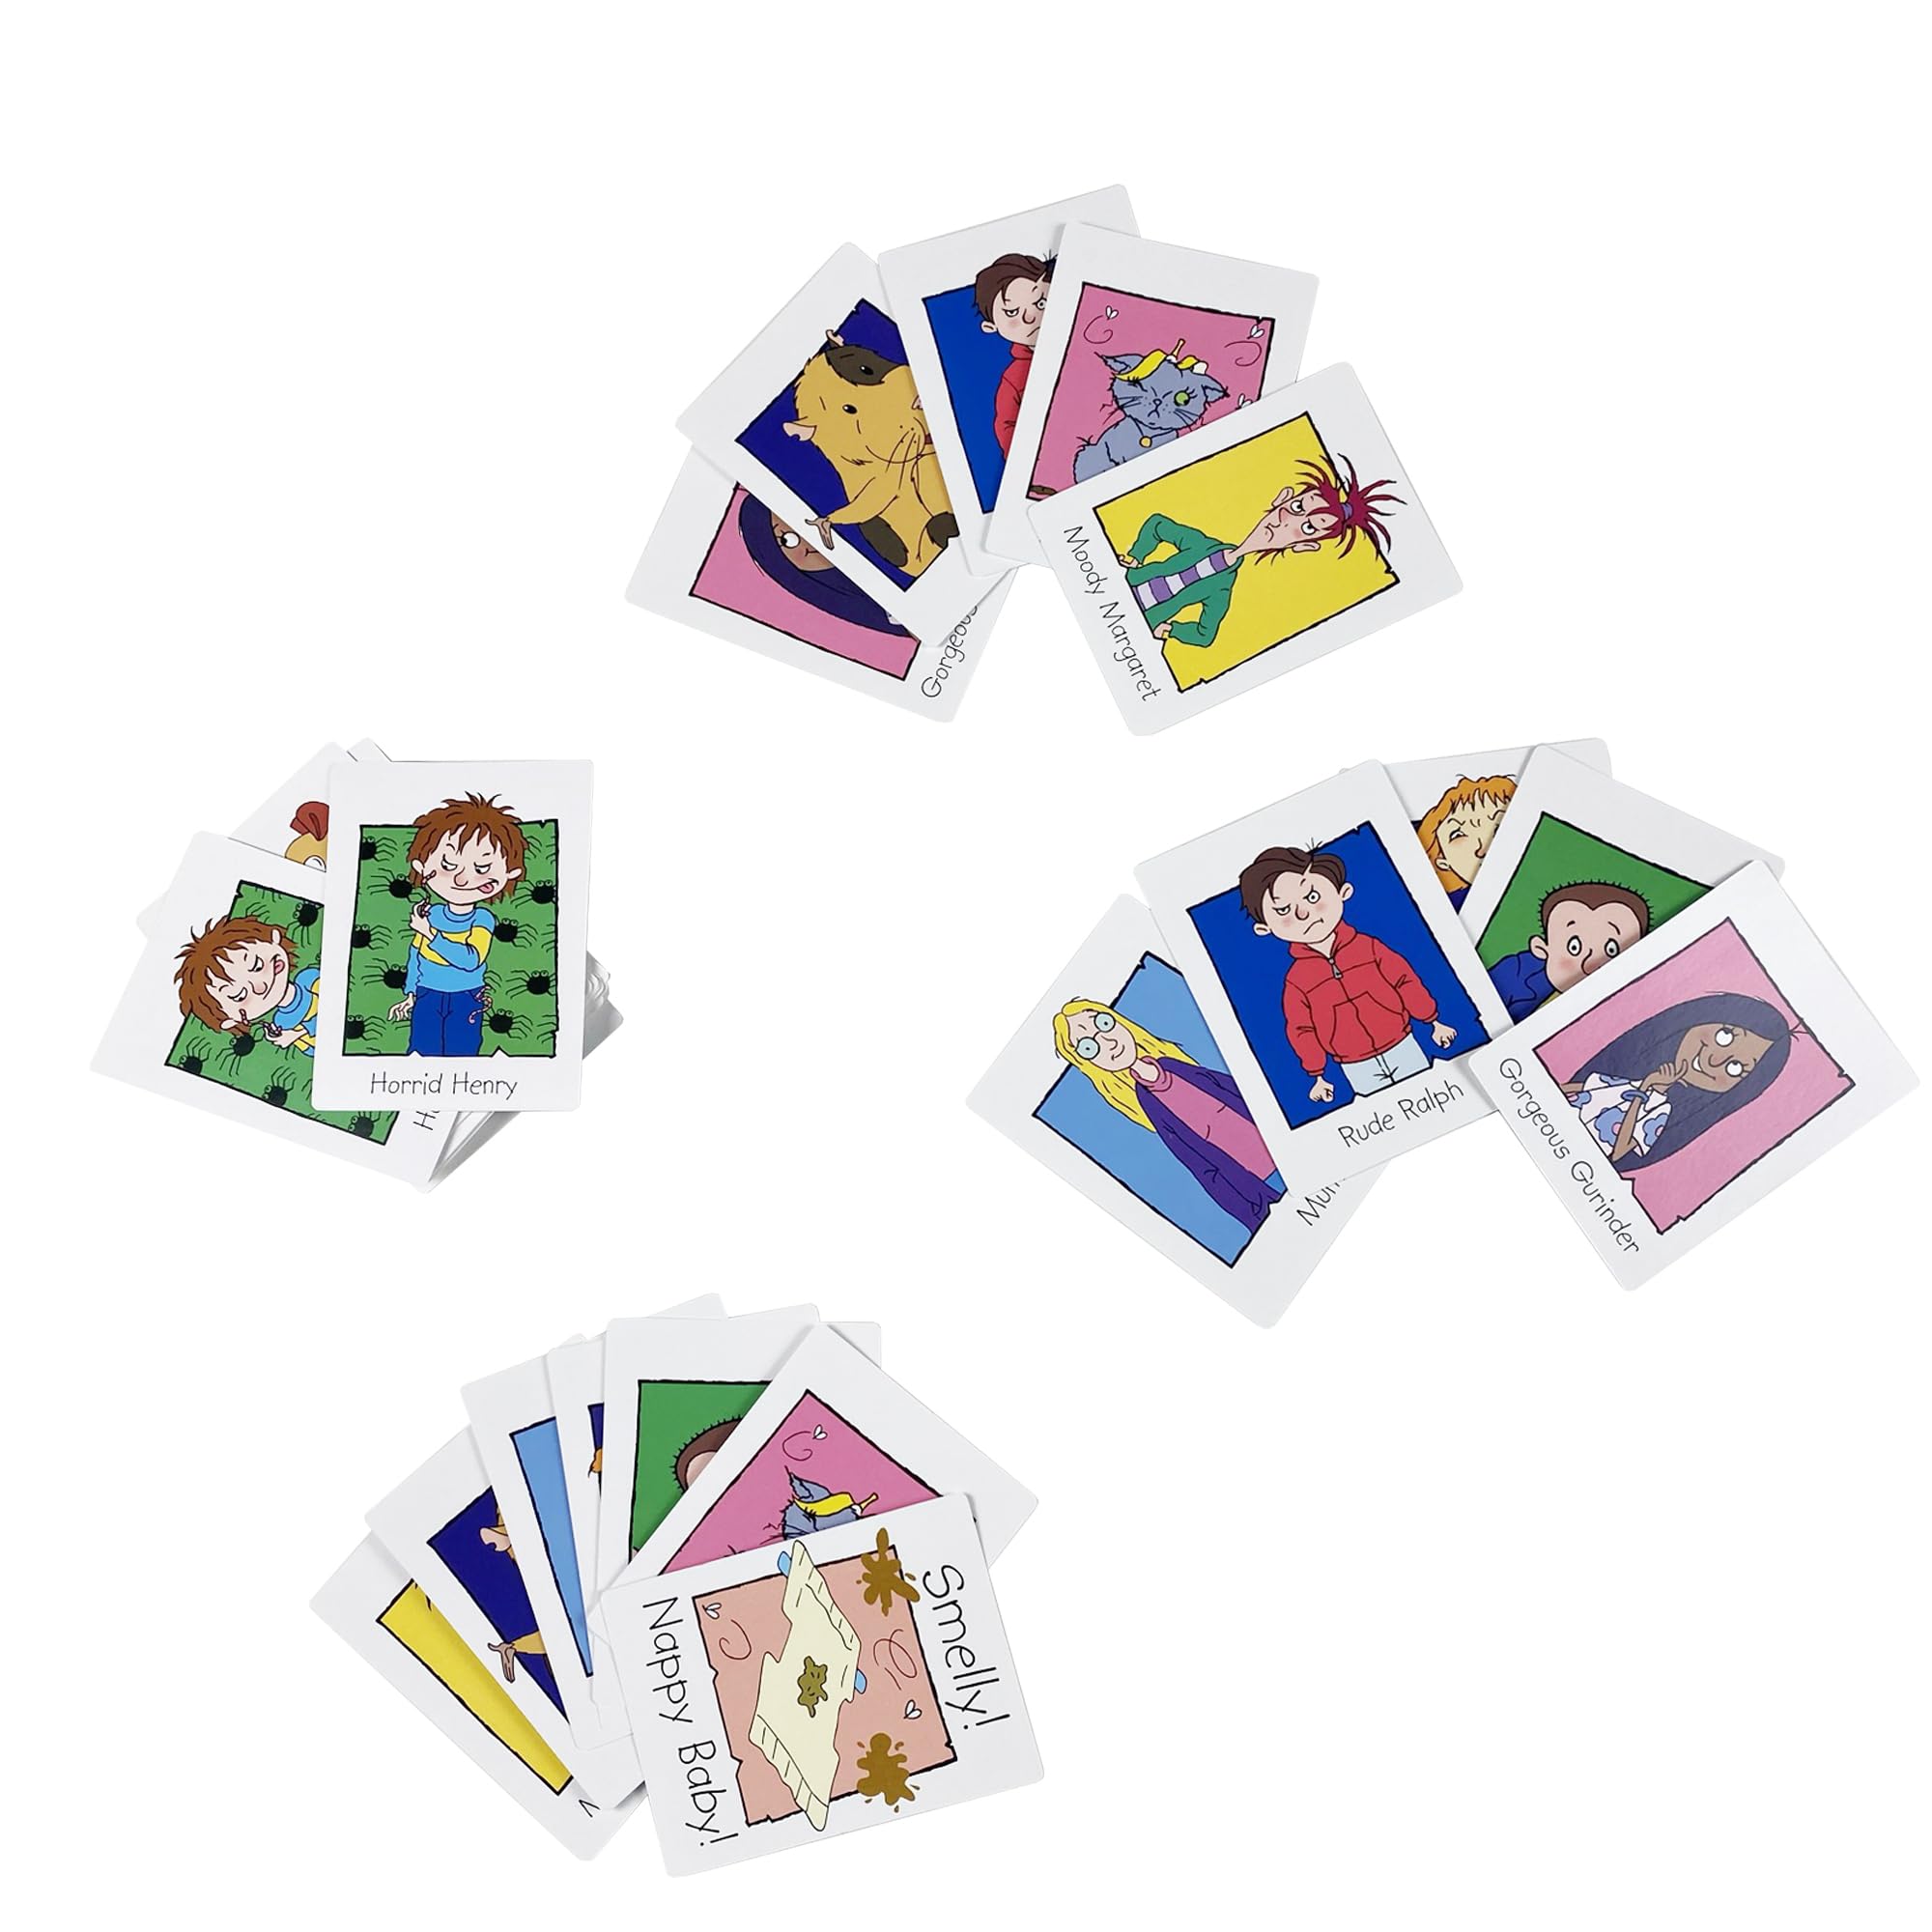 Horrid Henry Smelly Nappy Card Game